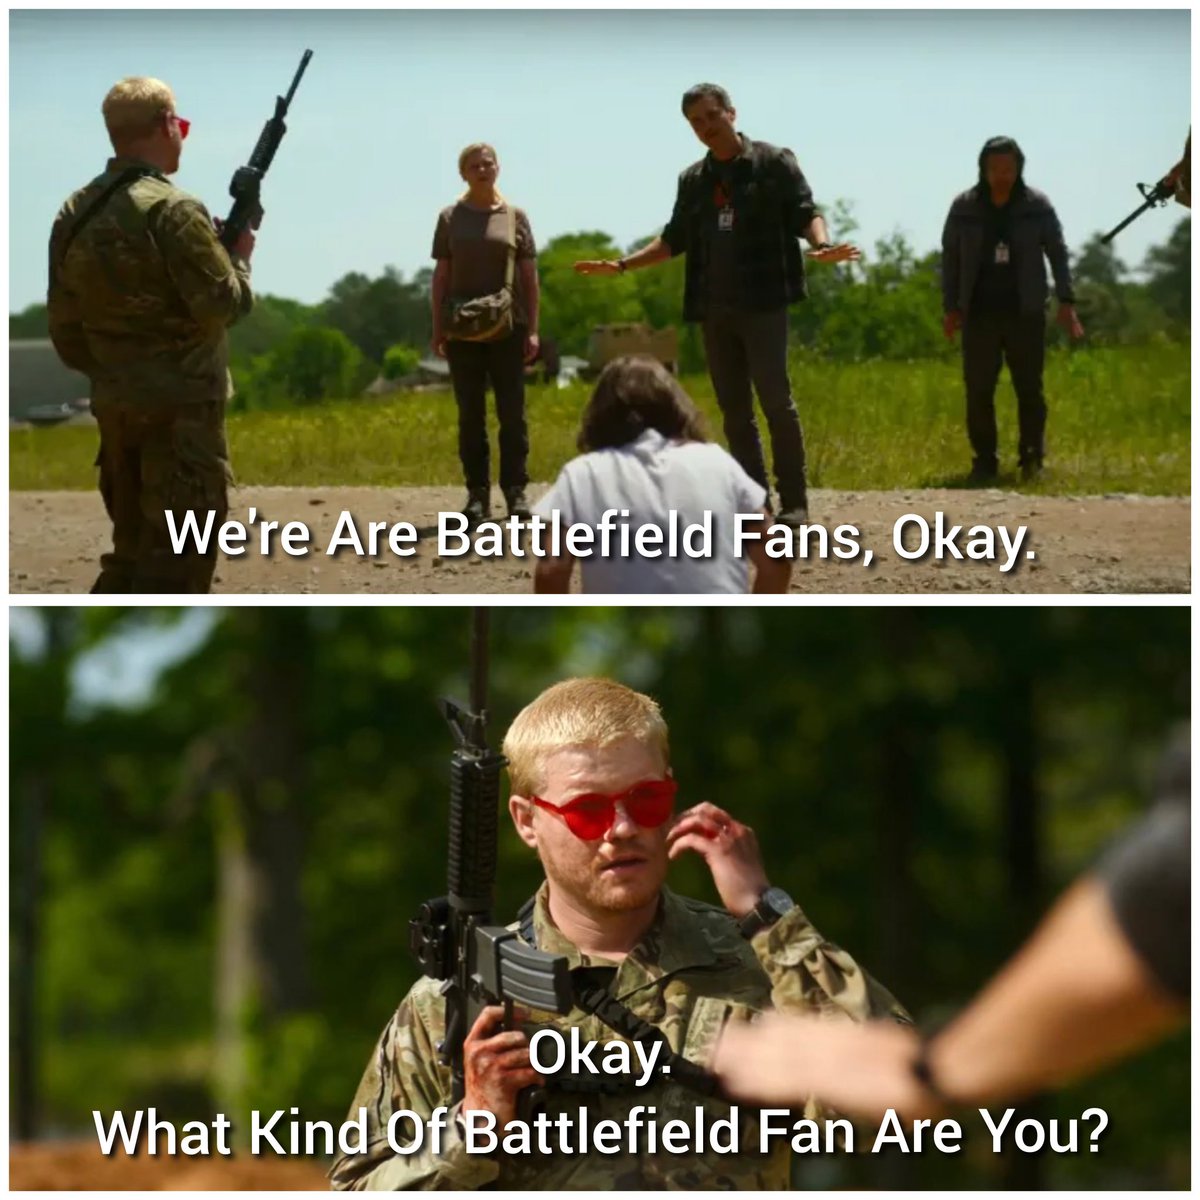 What kind of fan are you? 👀😄 #Battlefield